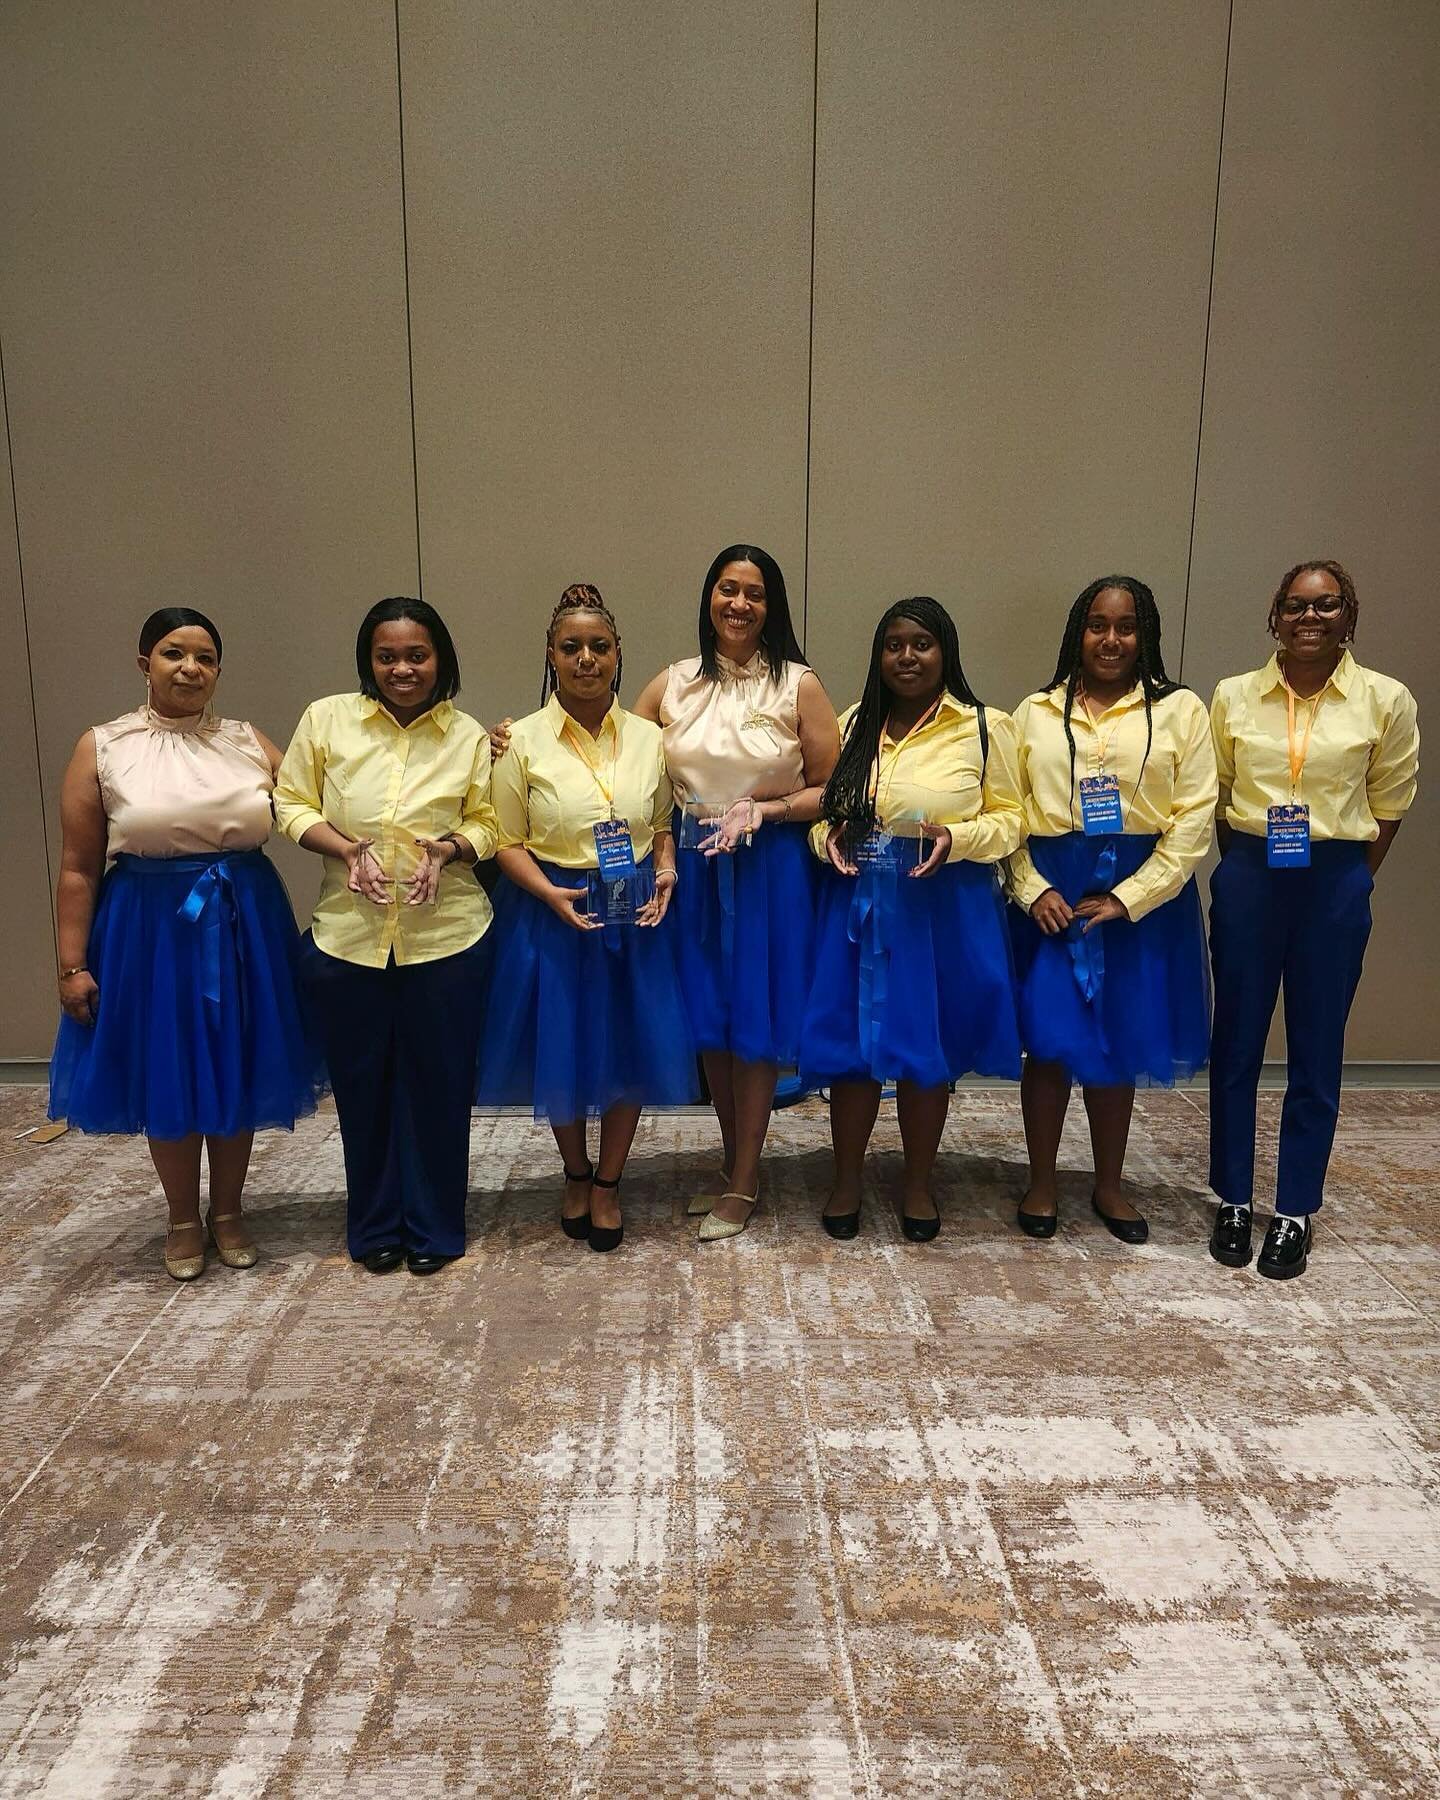 But wait there&rsquo;s more!!! Our LGS Rhoer Club was also out in Las Vegas for the Western Region Conference and brought back some awards!! Our Rhoer Club is always hard at work in the community! Congratulations @lgs_rhoer_club !!

Awards: 
🦋2024 R